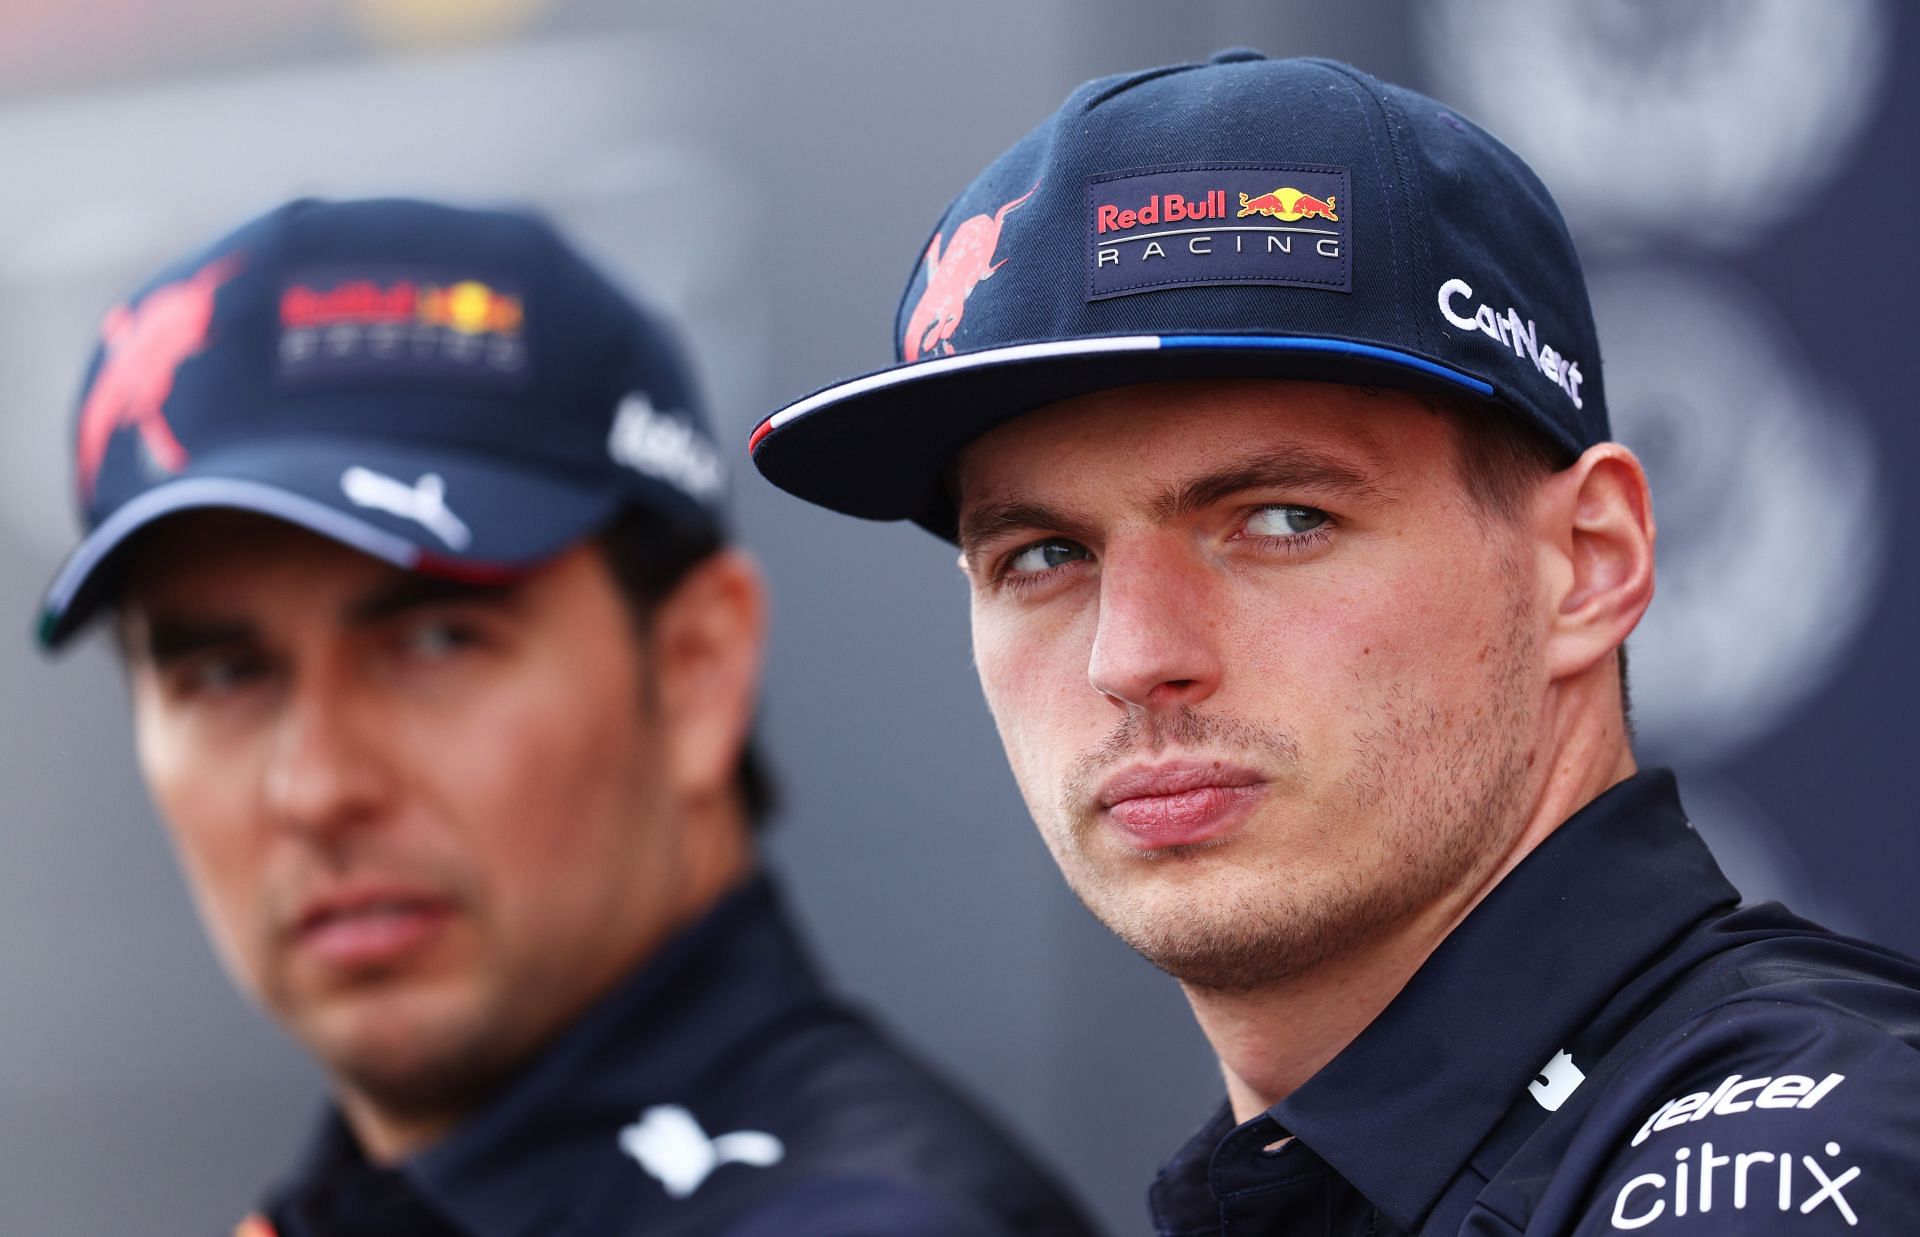 Sergio Perez (background) and Max Verstappen (foreground) during the 2022 F1 Grand Prix of Canada